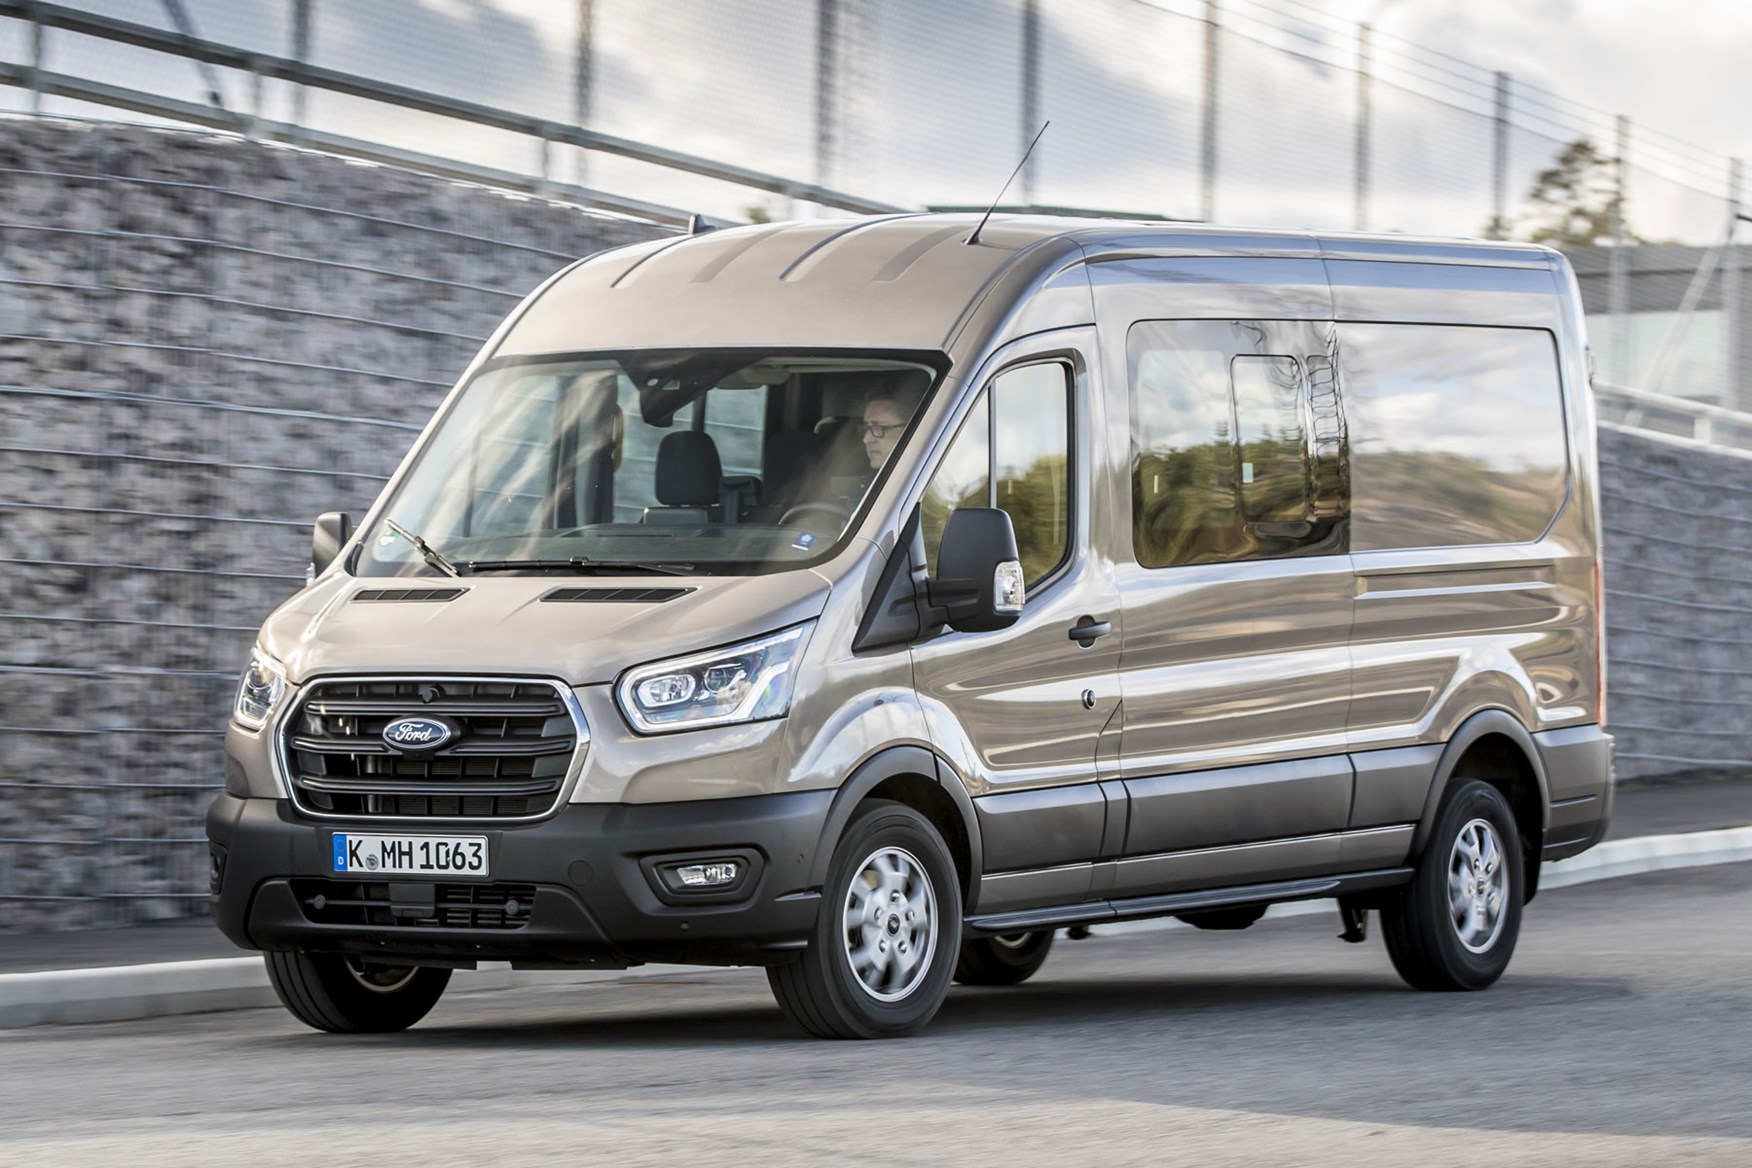 Ford Transit review - 2019 facelift model, DCiV, front view